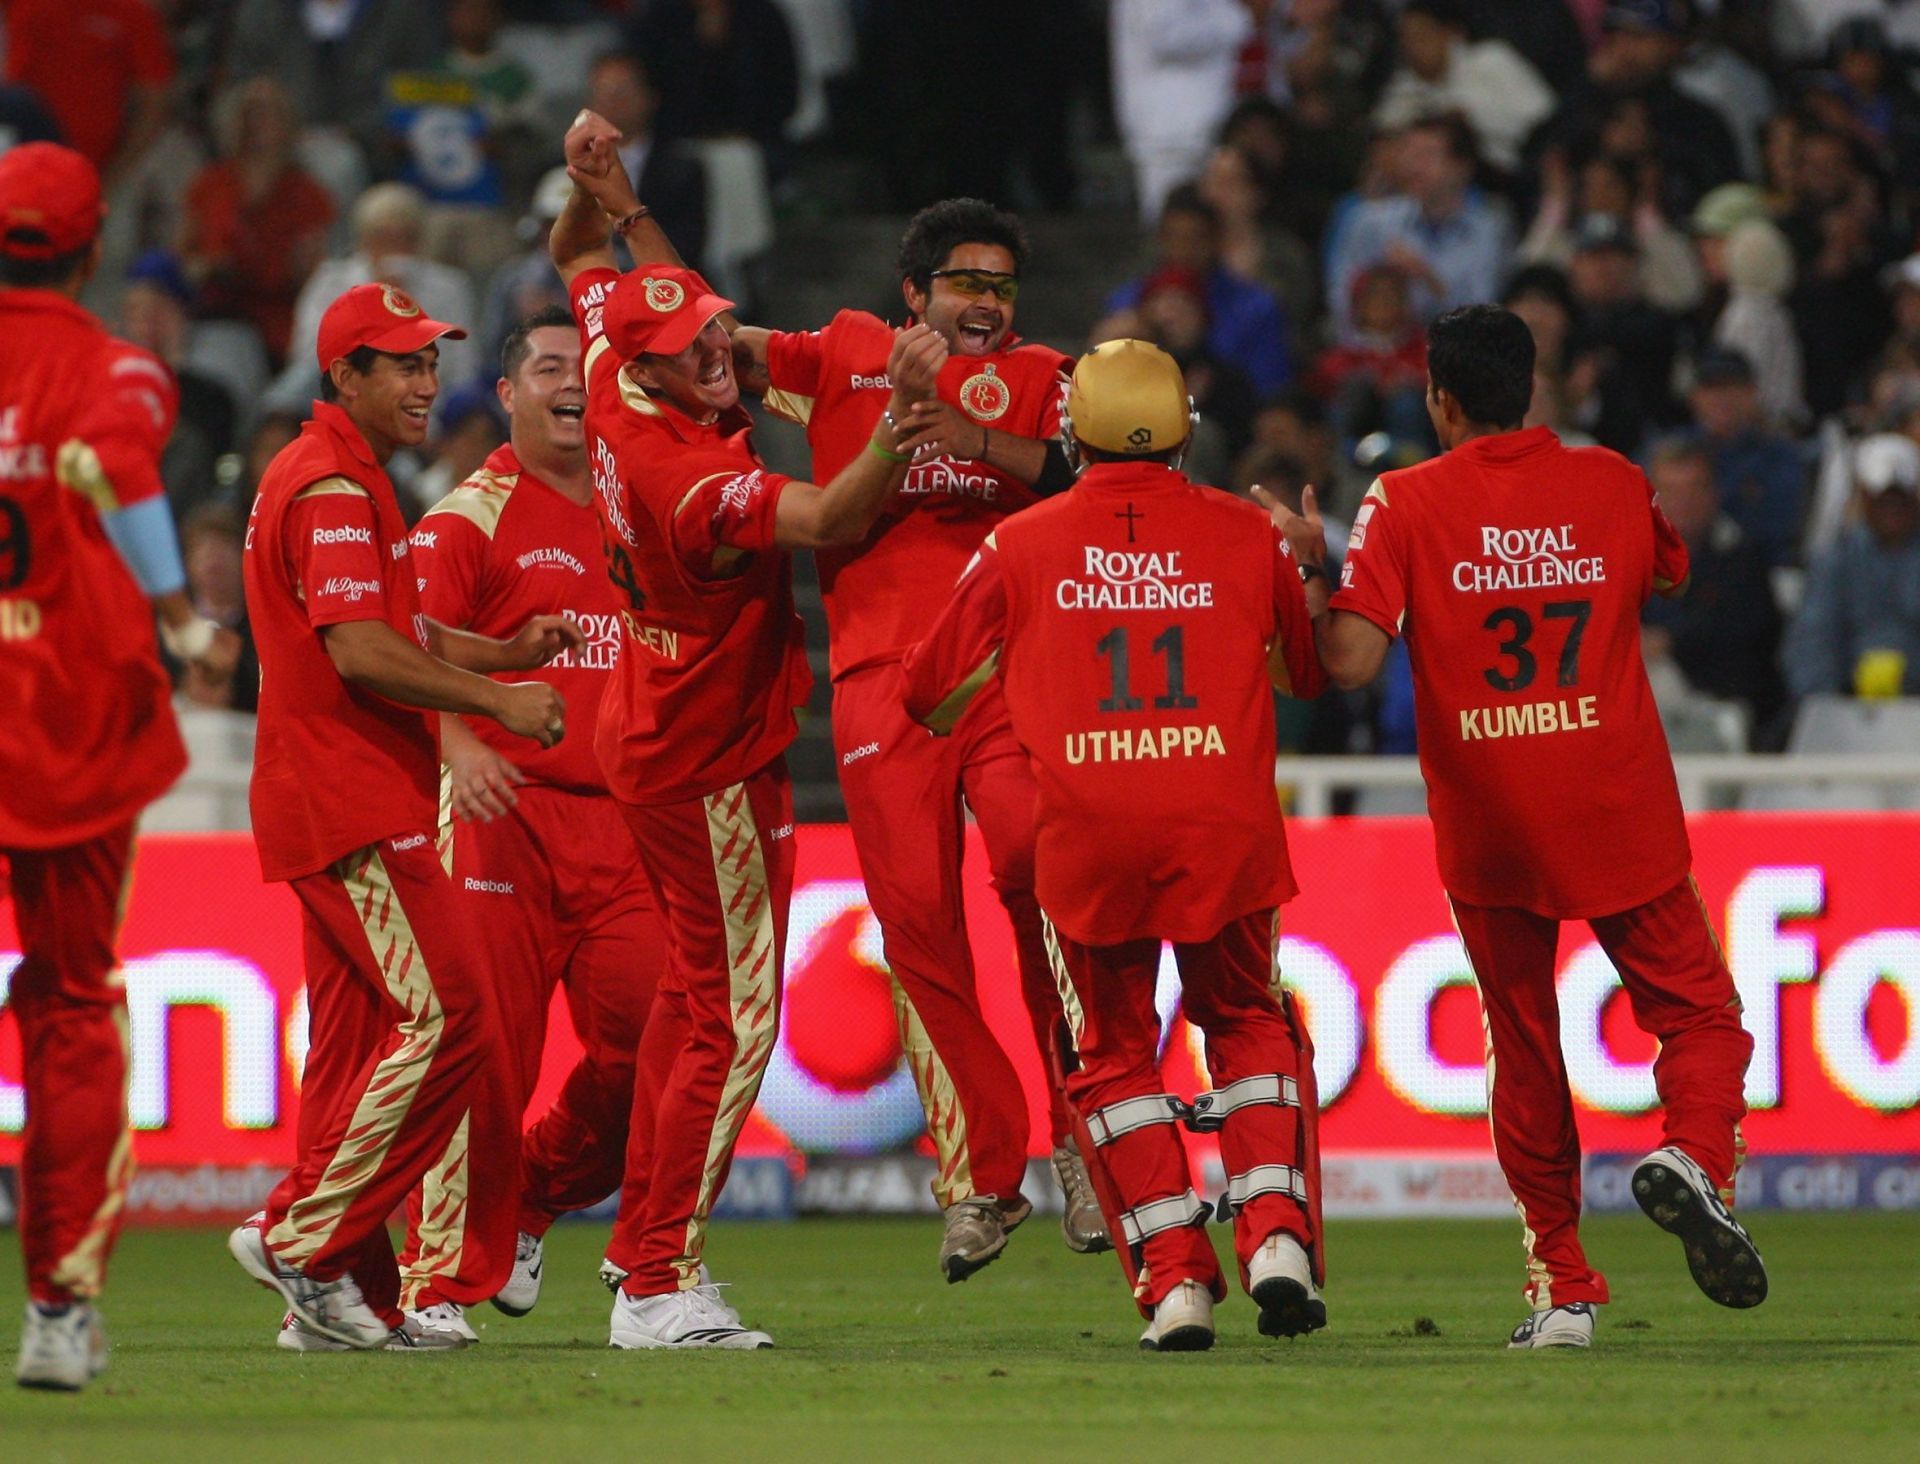 Royal Challengers Bangalore in the IPL. Pic: Getty Images